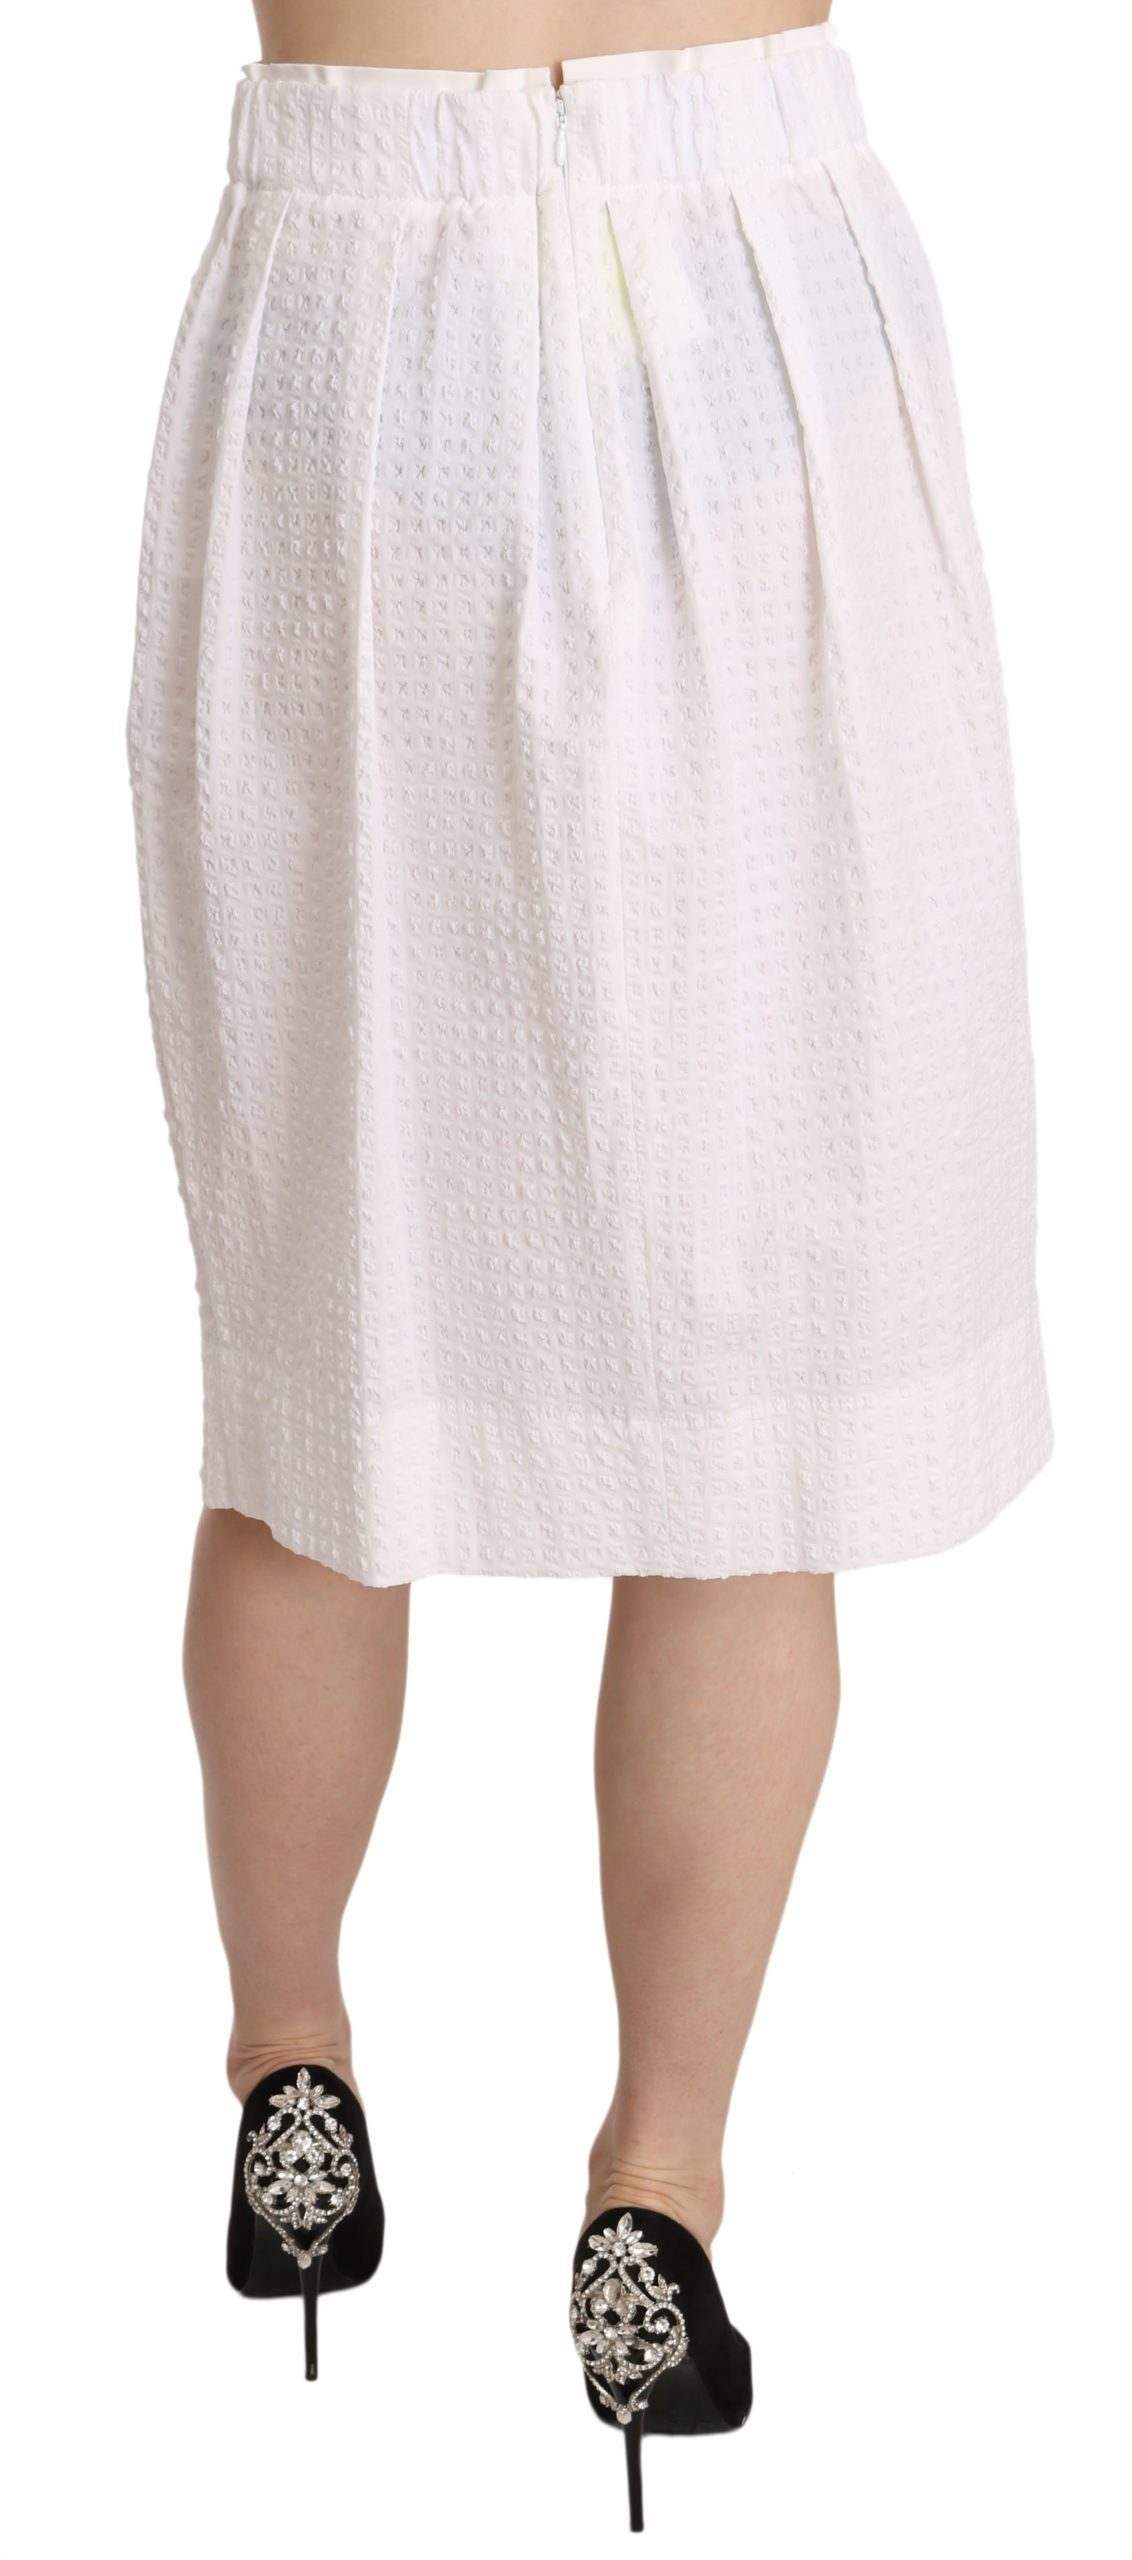 L'Autre Chose  Jacquard Plain Weave Stretch Midi Skirt #women, Catch, feed-agegroup-adult, feed-color-white, feed-gender-female, feed-size-IT40|S, Gender_Women, IT40|S, Kogan, L'Autre Chose, Skirts - Women - Clothing, White, Women - New Arrivals at SEYMAYKA